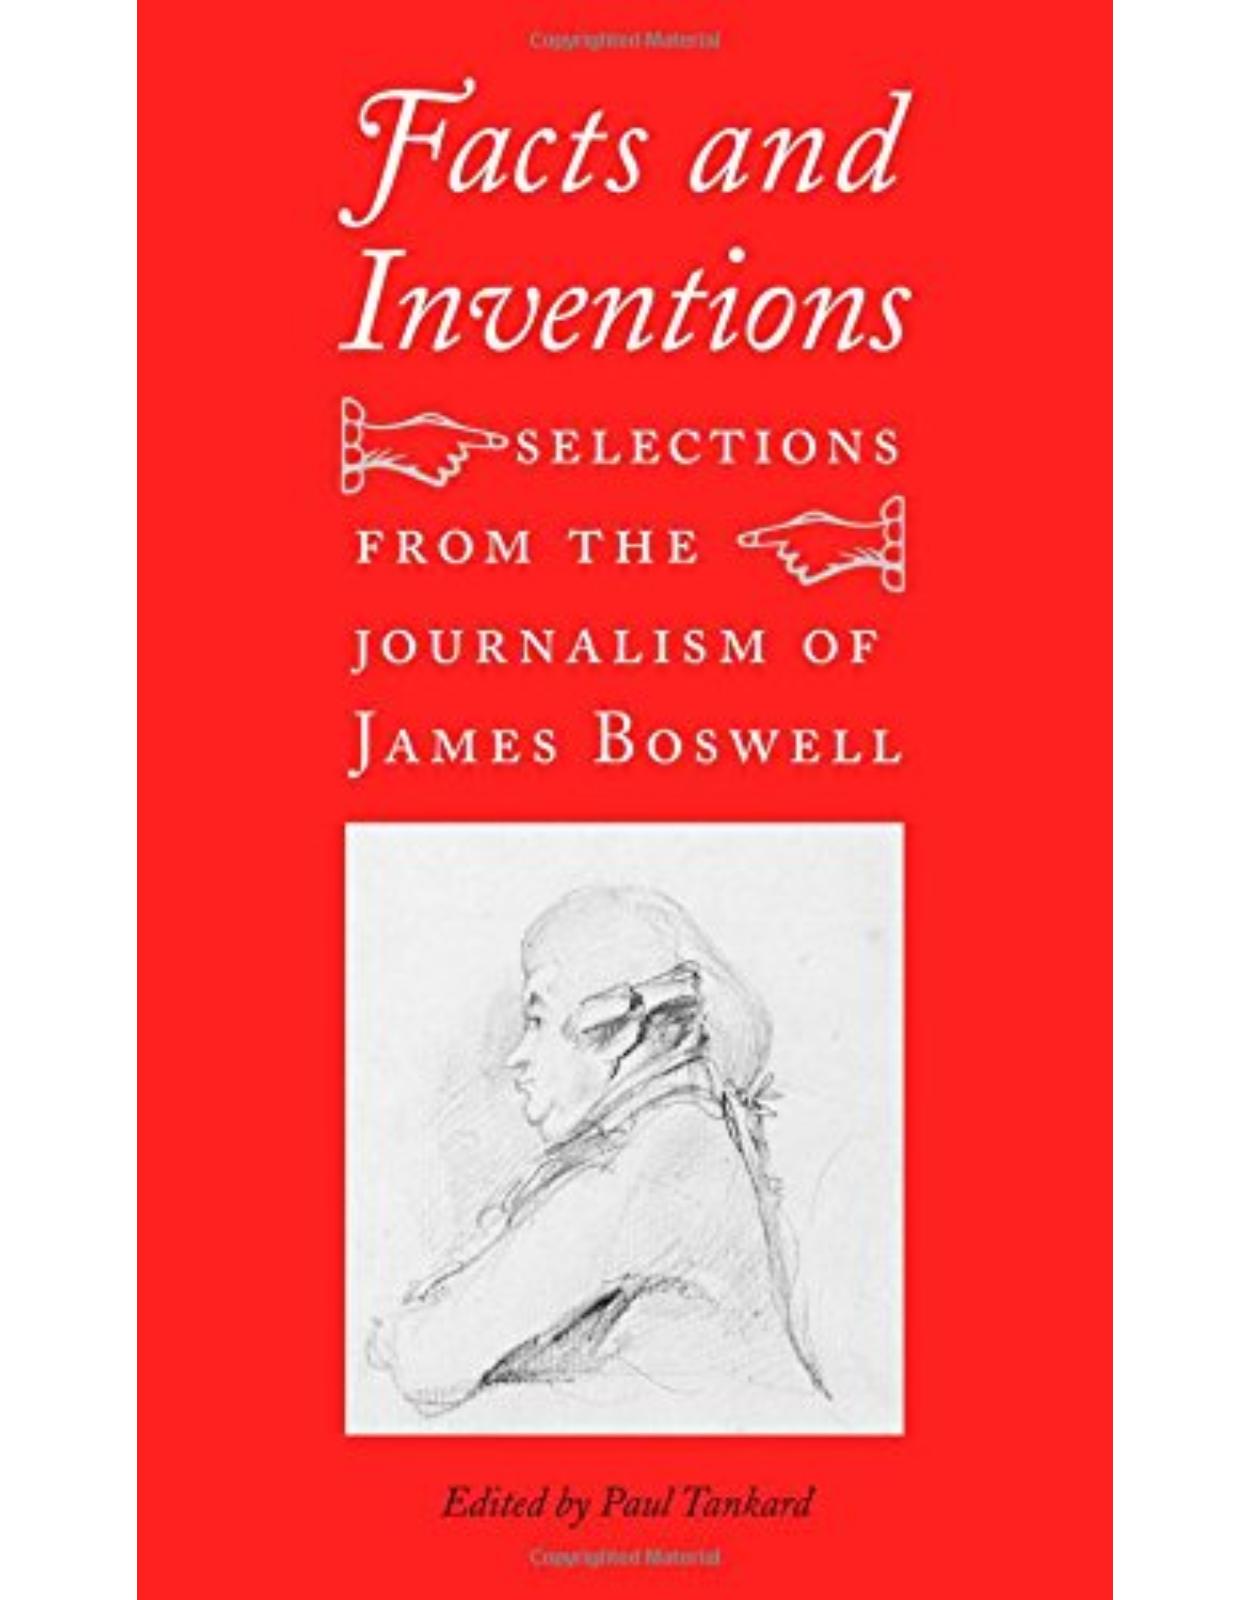 Facts and Inventions. Selections from the Journalism of James Boswell